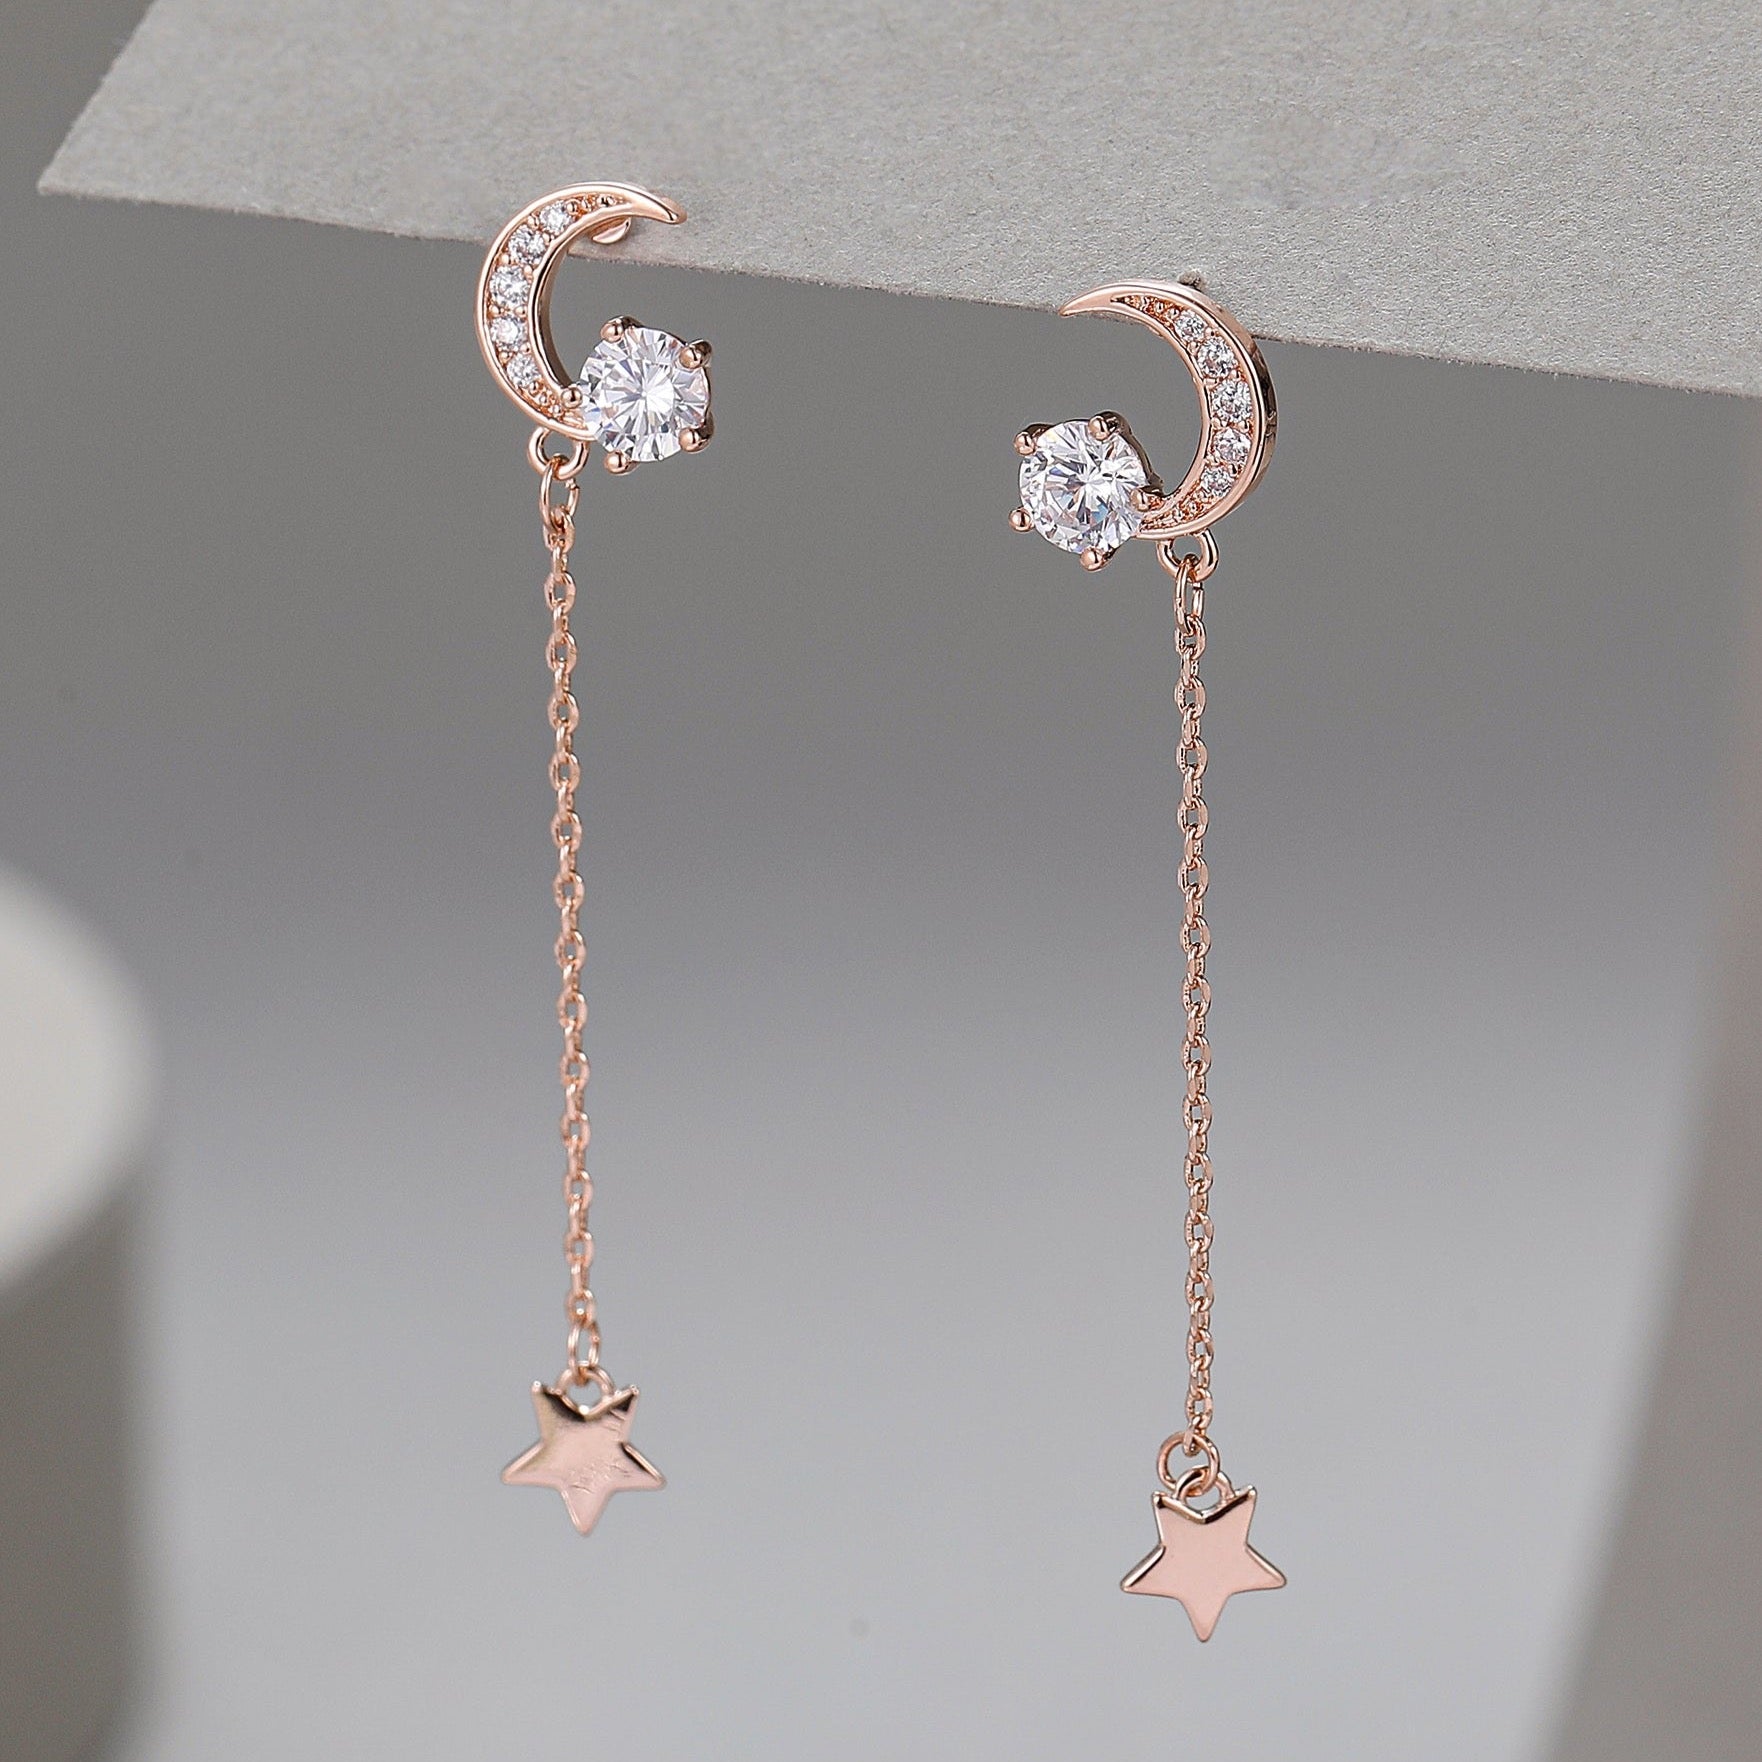 Rose Gold Moon and Star Drop Crystal Earrings